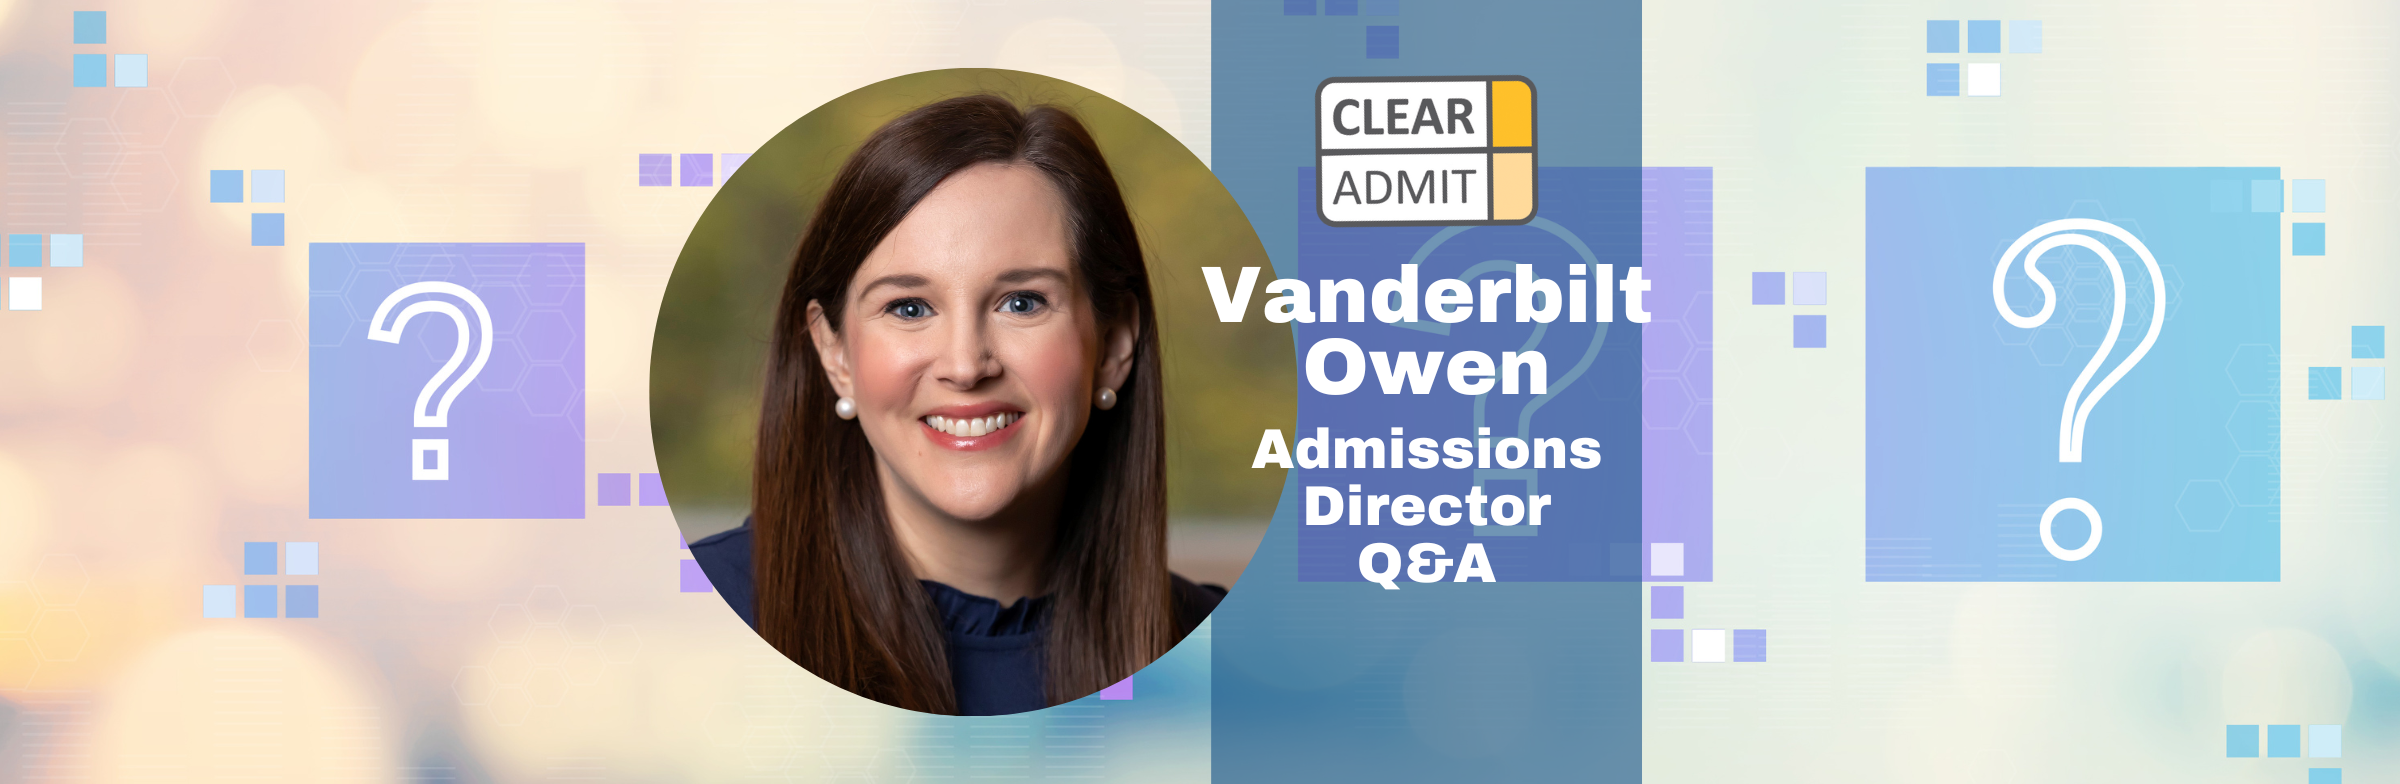 Image for Admissions Director Q&A: Bailey McChesney of Vanderbilt Owen